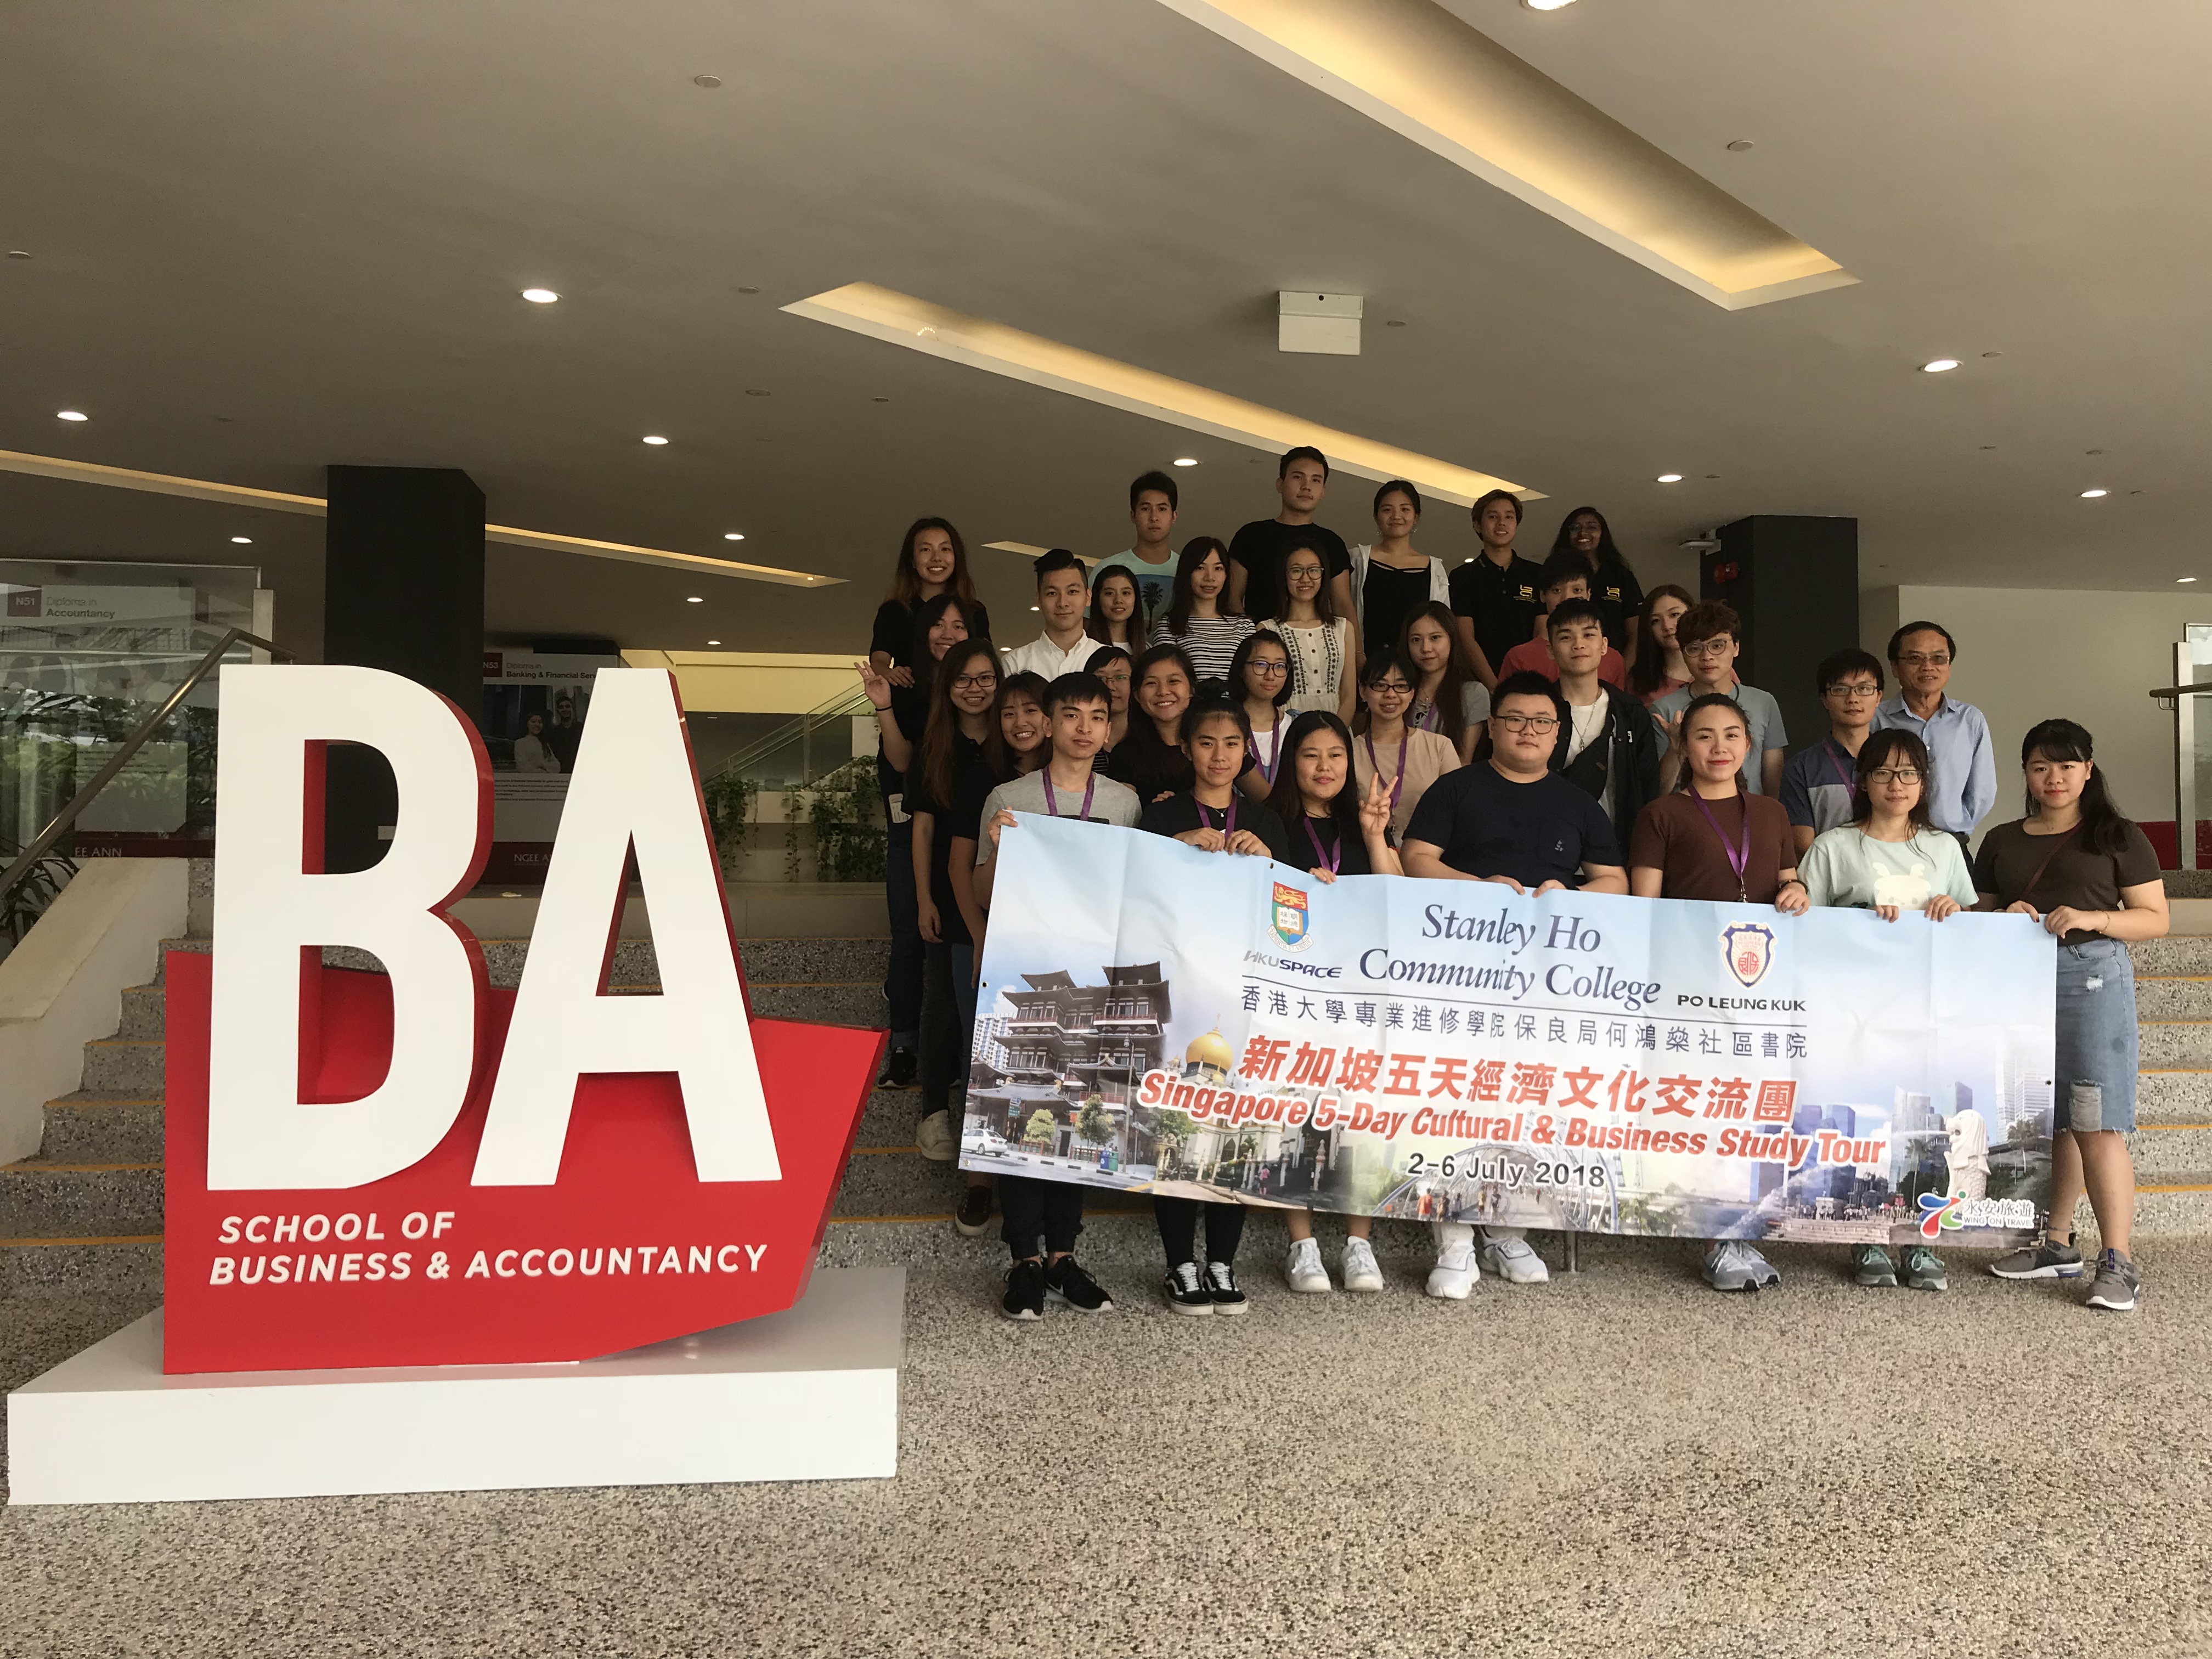 Singapore Business and Cultural Study Tour 2018 - Photo - 5